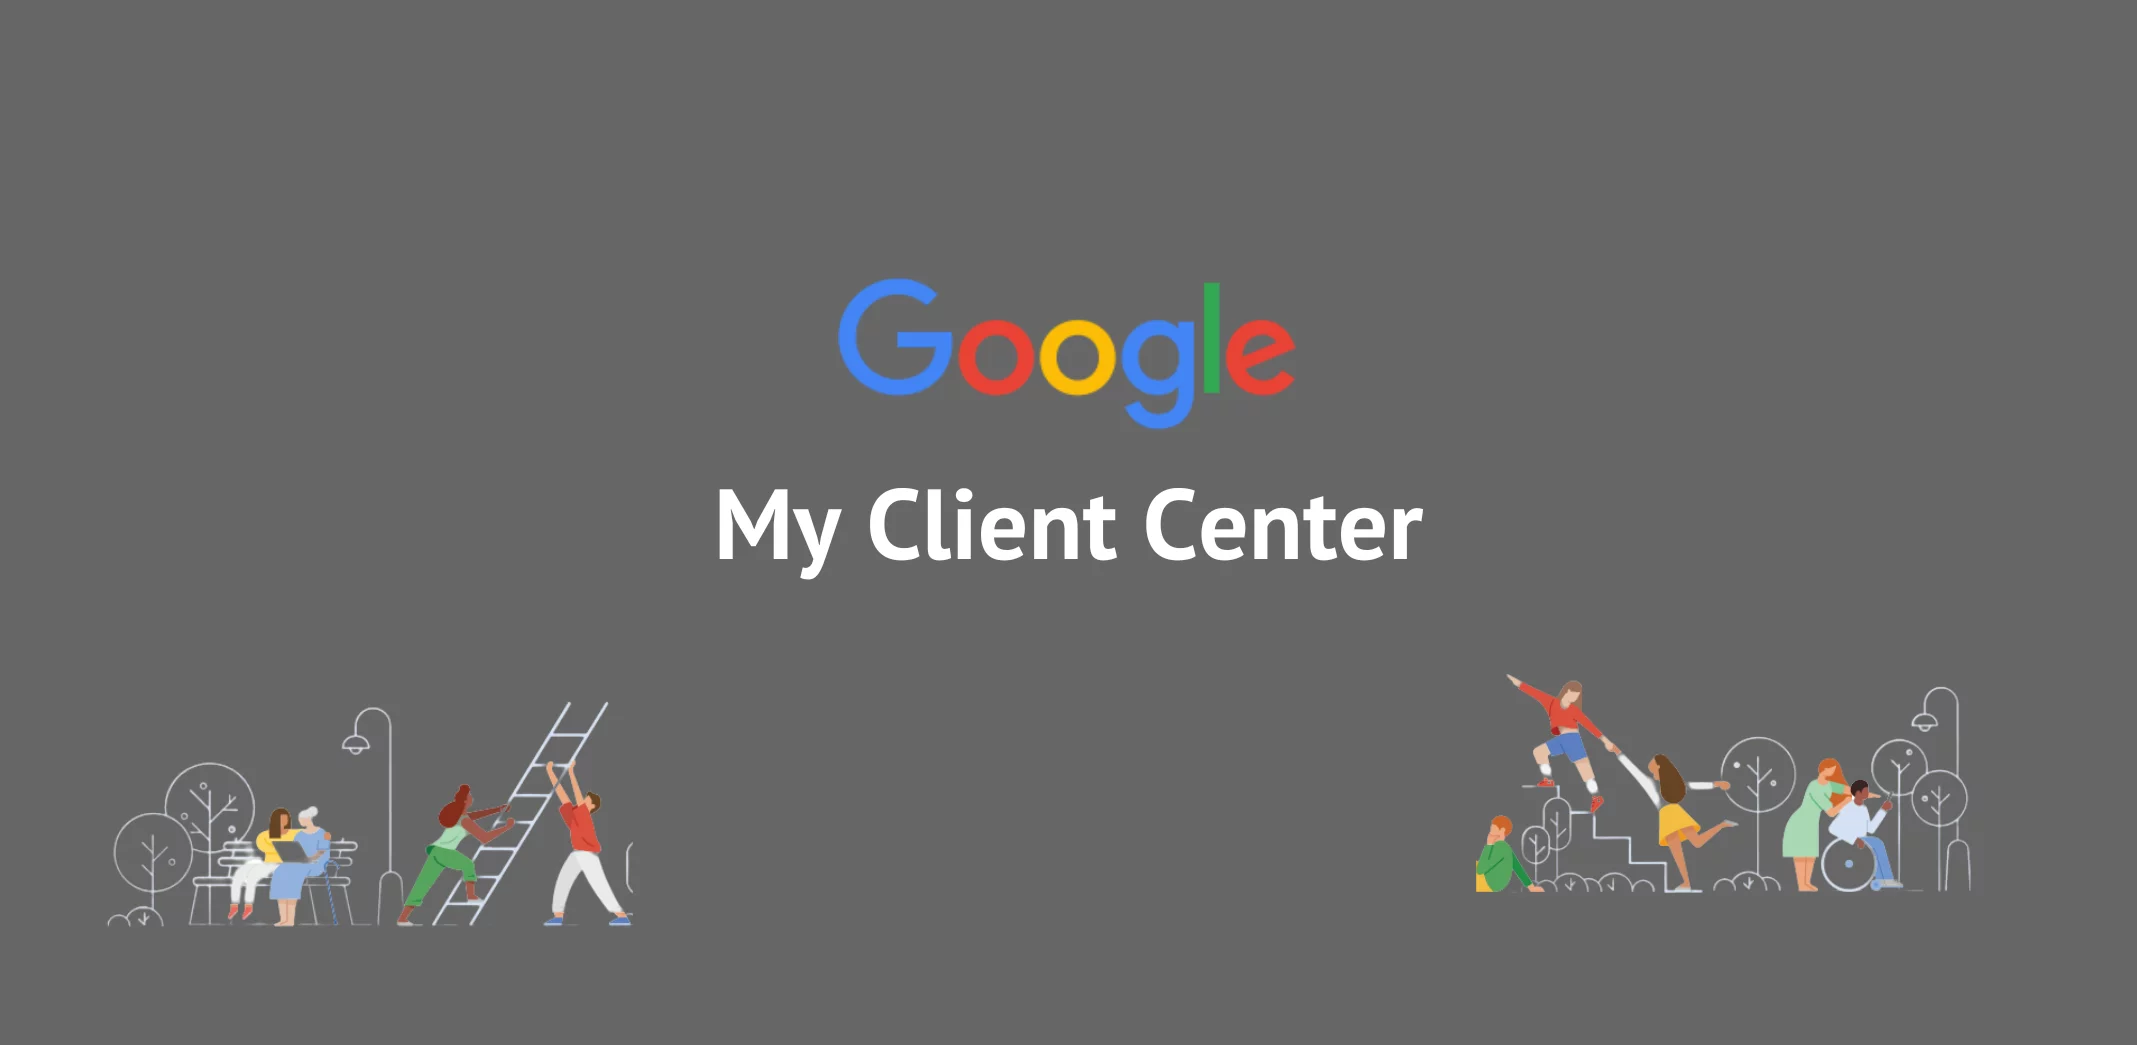  What is a My Client